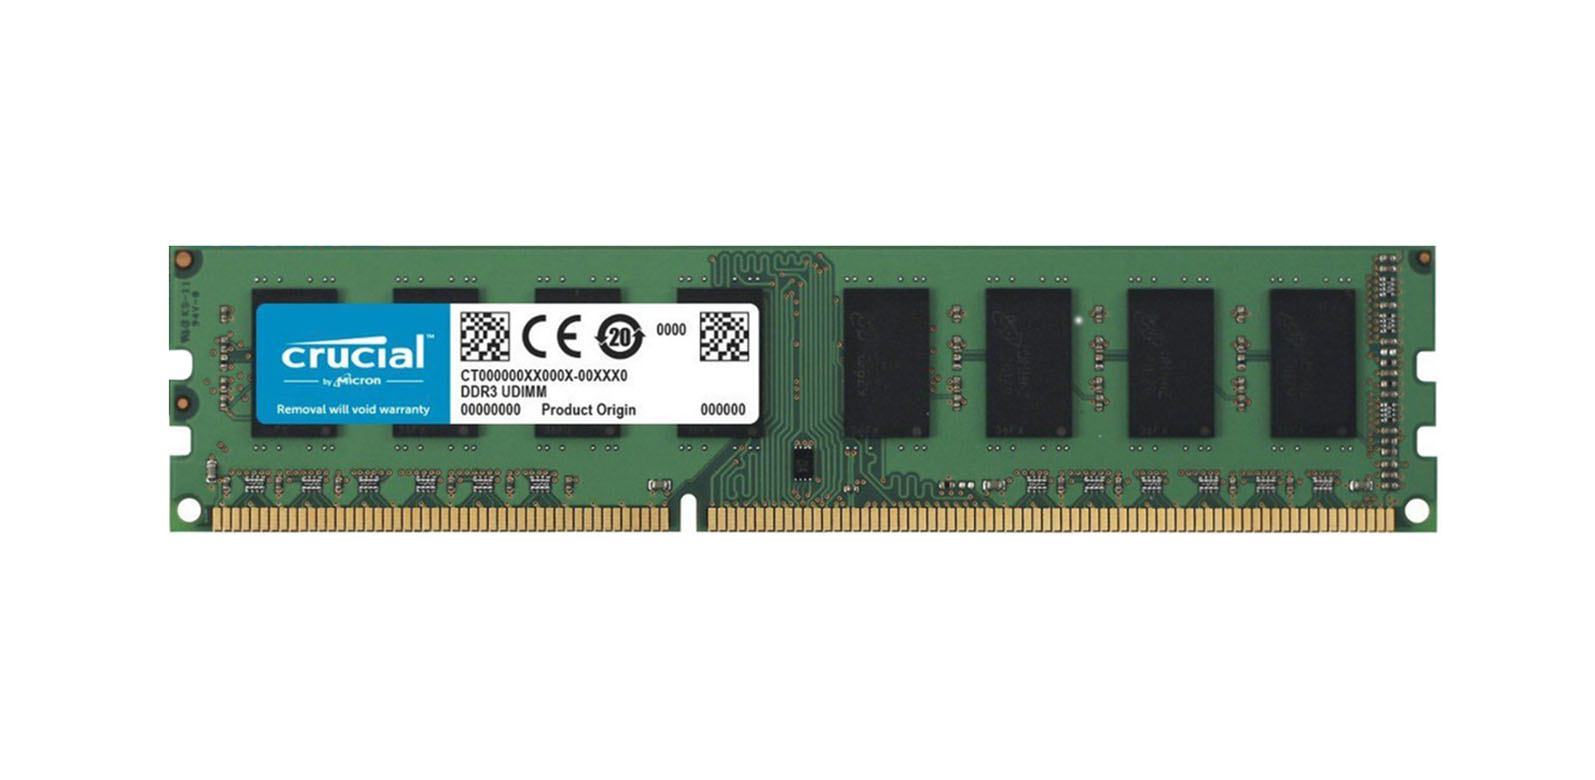 Crucial CT3609306 8GB DDR3-1600MHz PC3-12800 ECC Registered CL11 240-Pin DIMM 1.35V Low Voltage Dual Rank Very Low Profile (VLP) Memory Module upgrade for Tyan S7066GM3NR